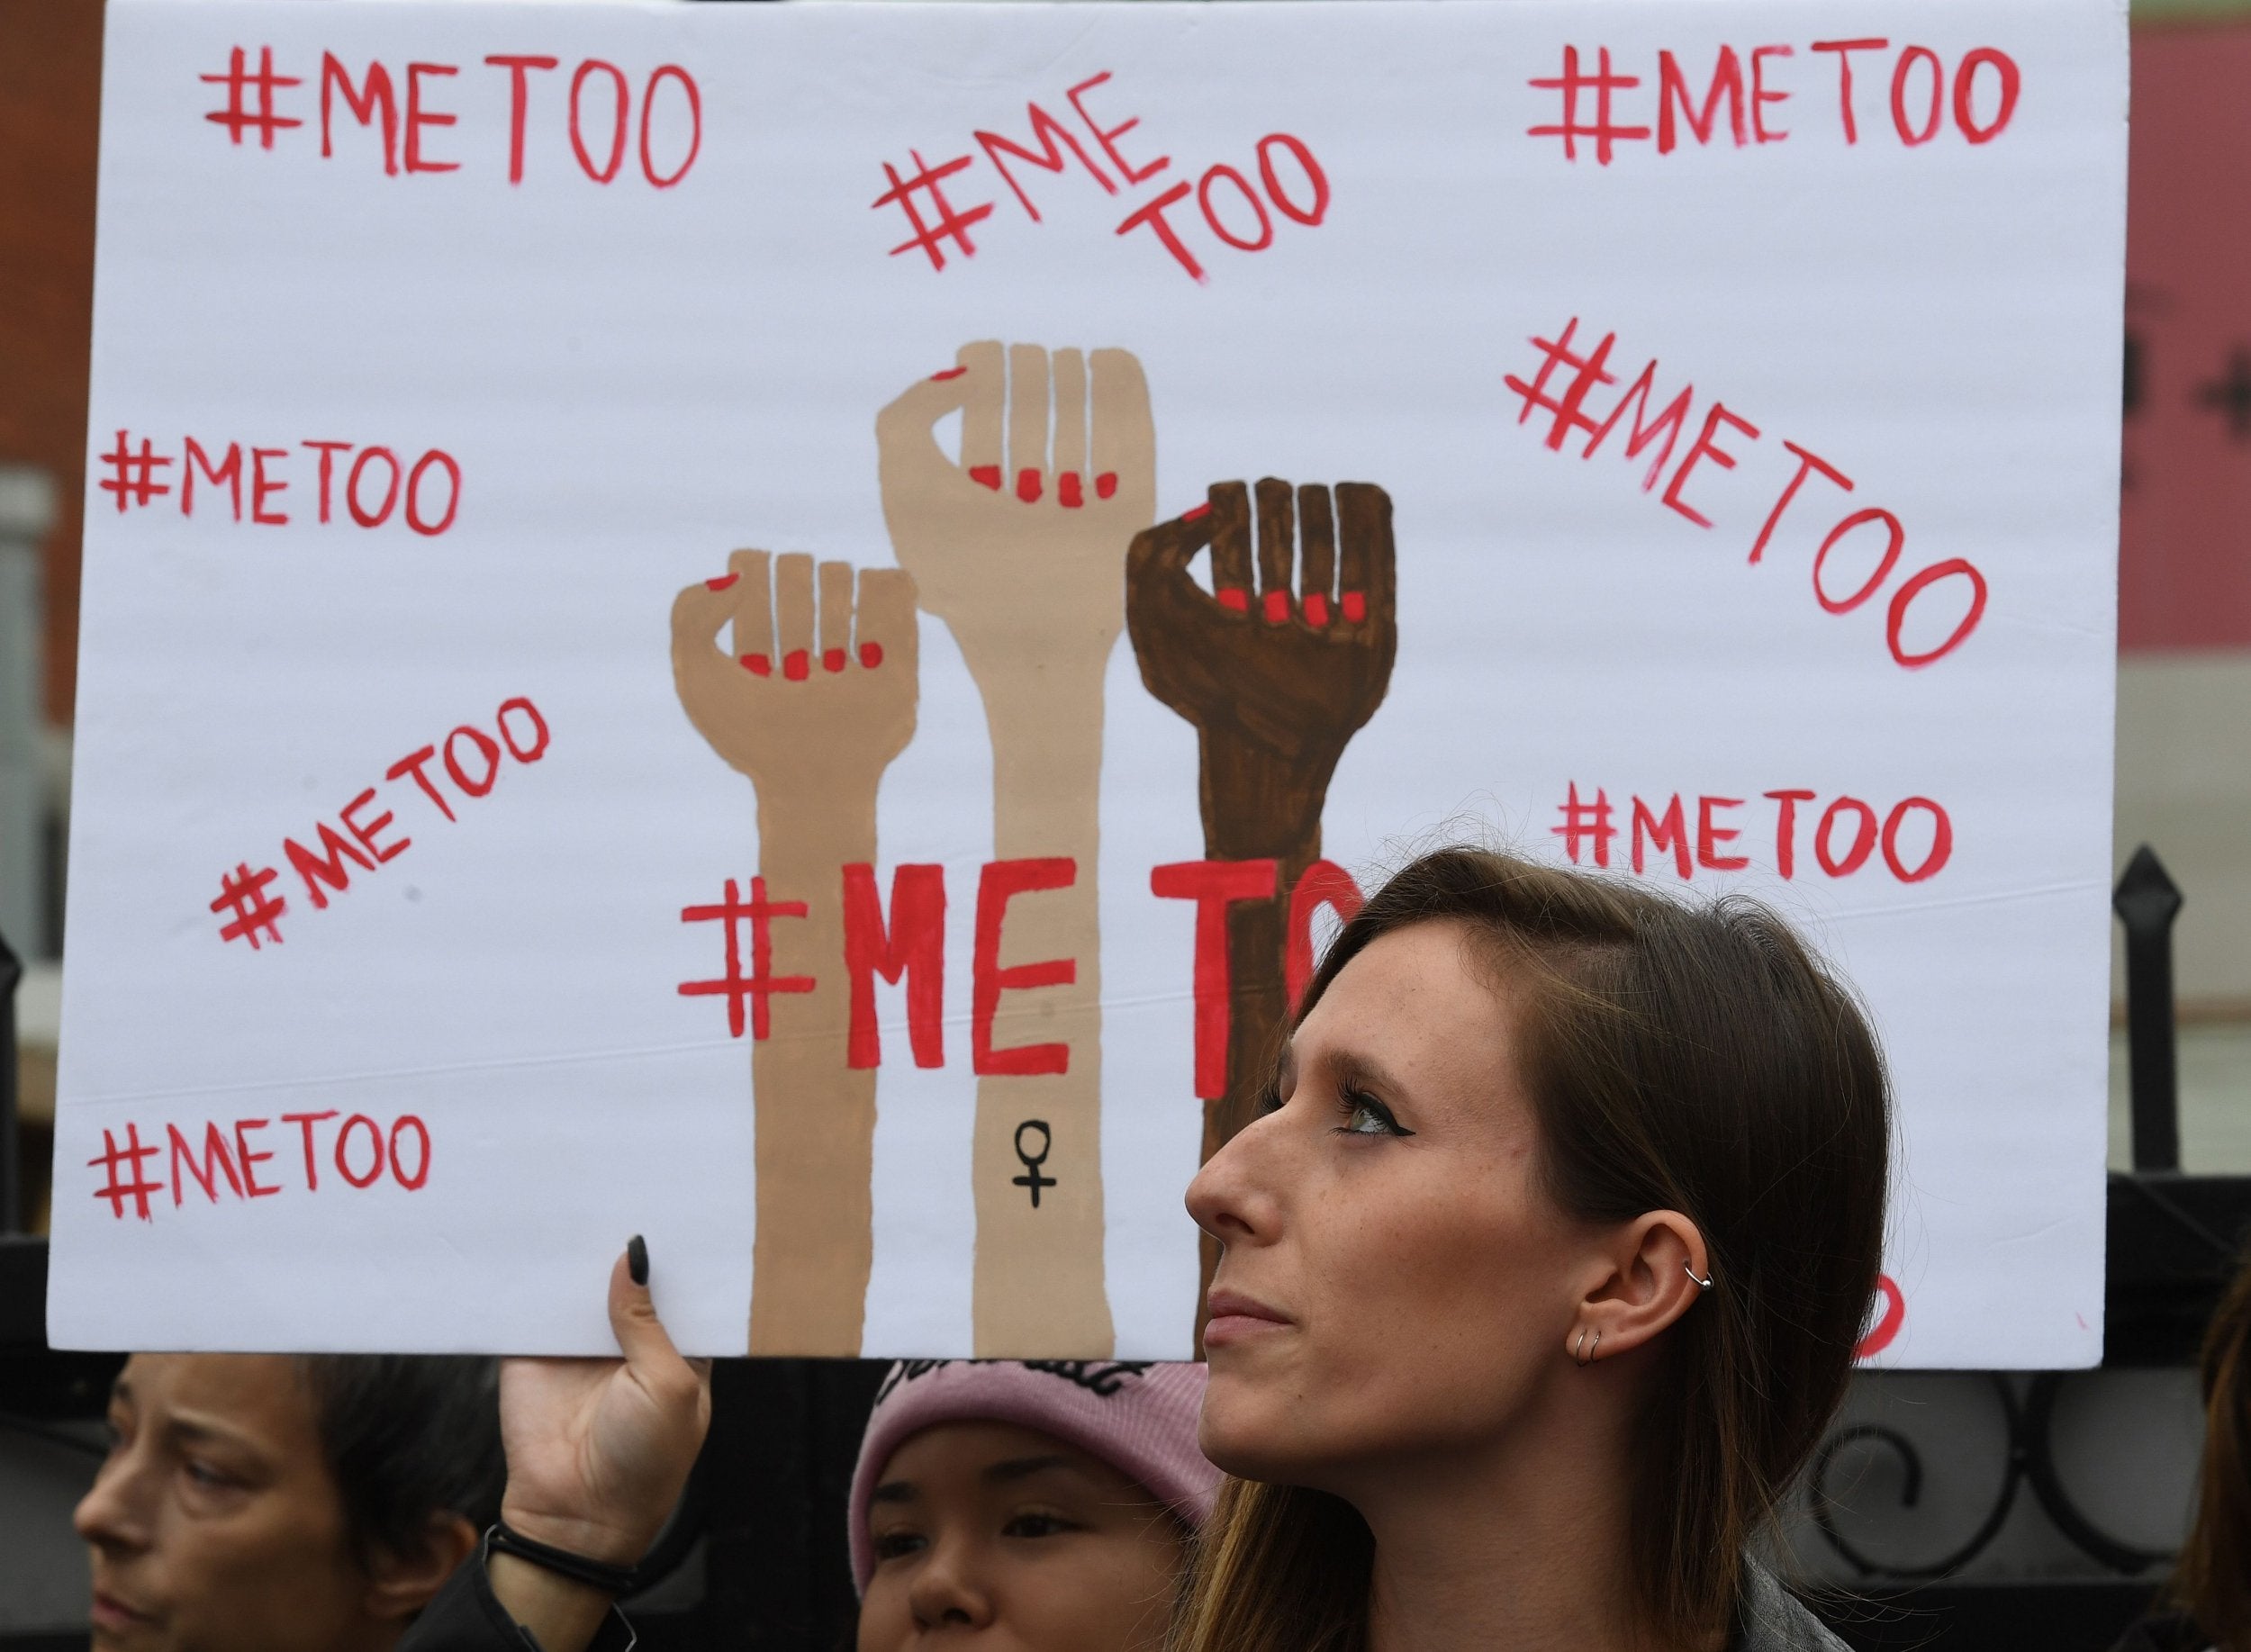 New York's mayor partially attributed rise to #MeToo movement